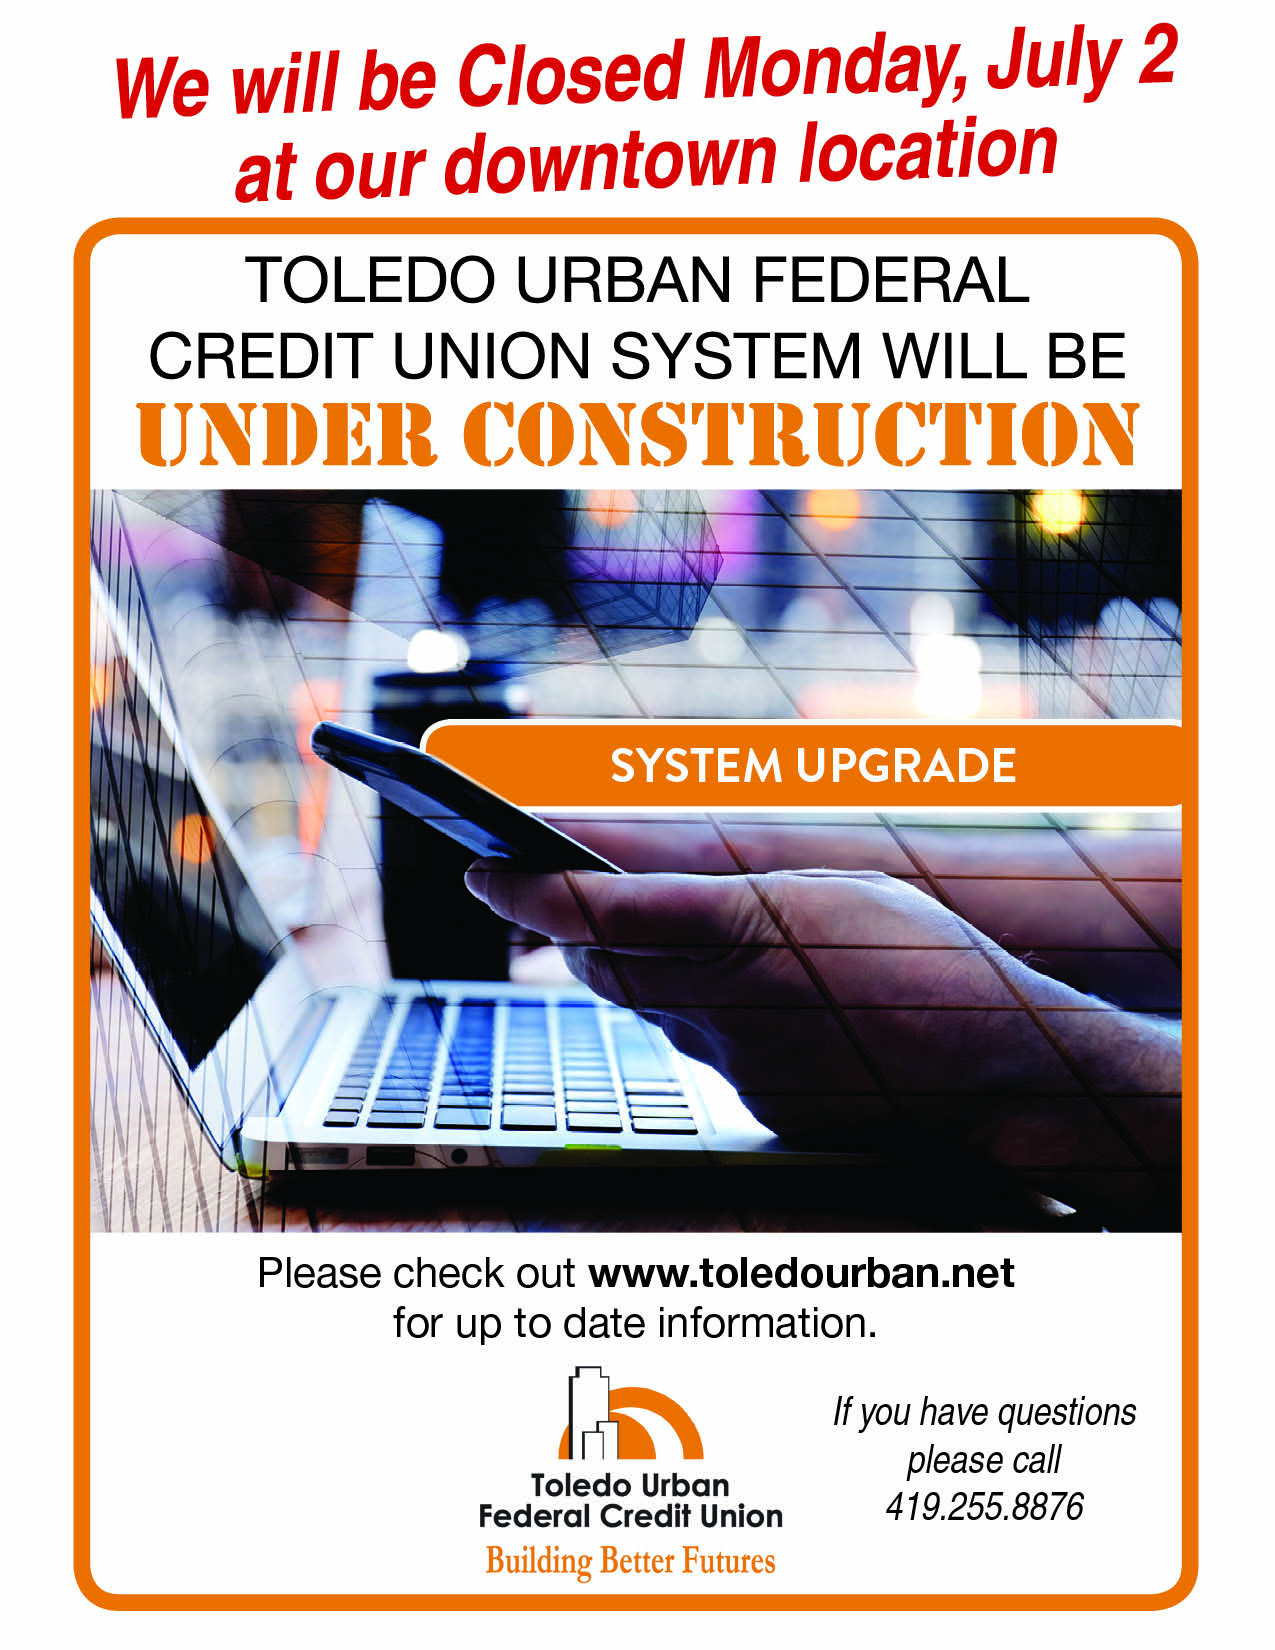 Flyer for the Toledo Urban System Upgrade and closures